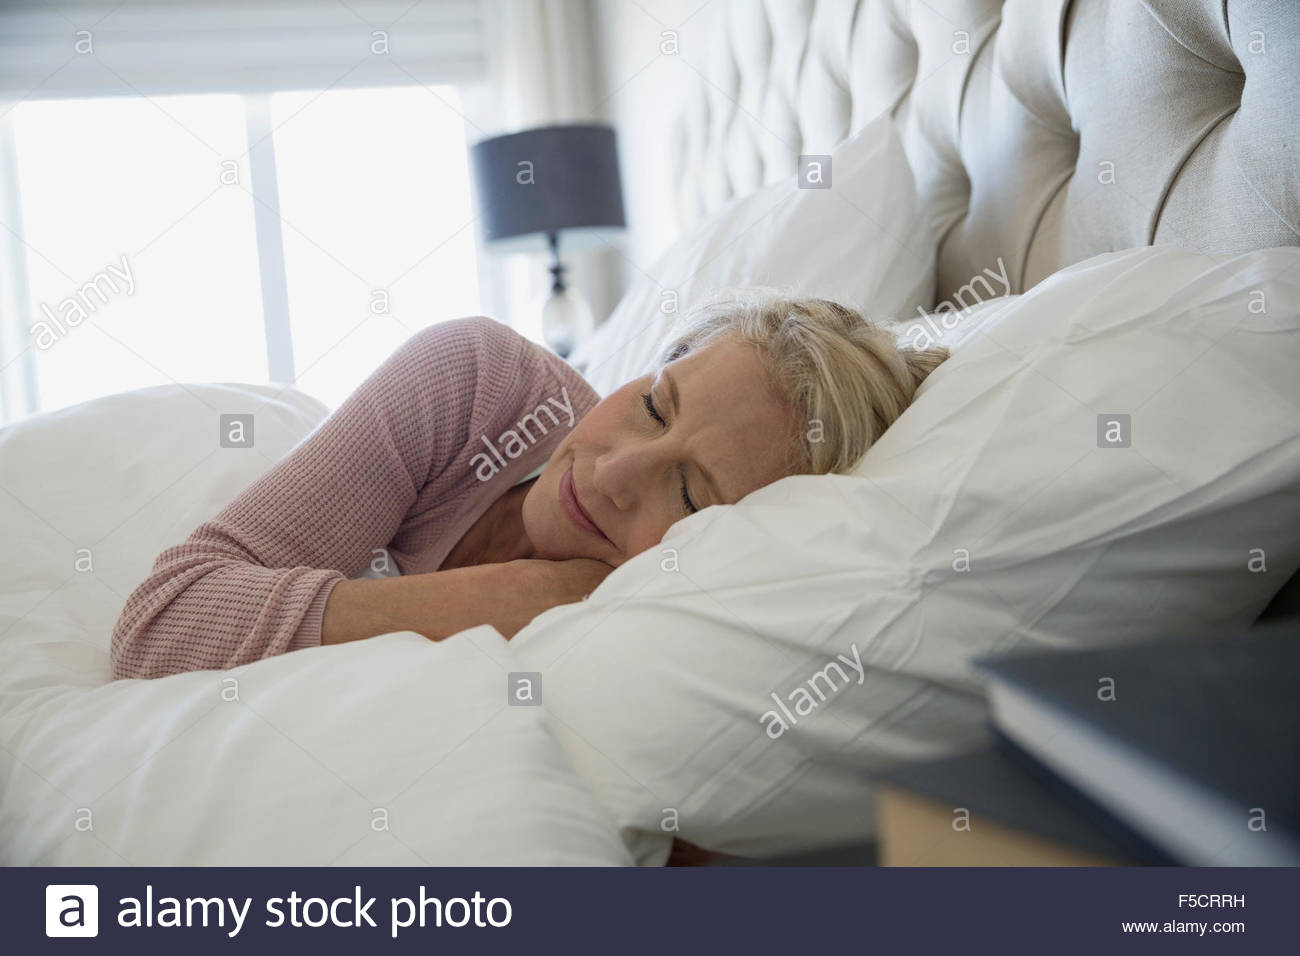 Comfortable woman sleeping in bed Stock Photo